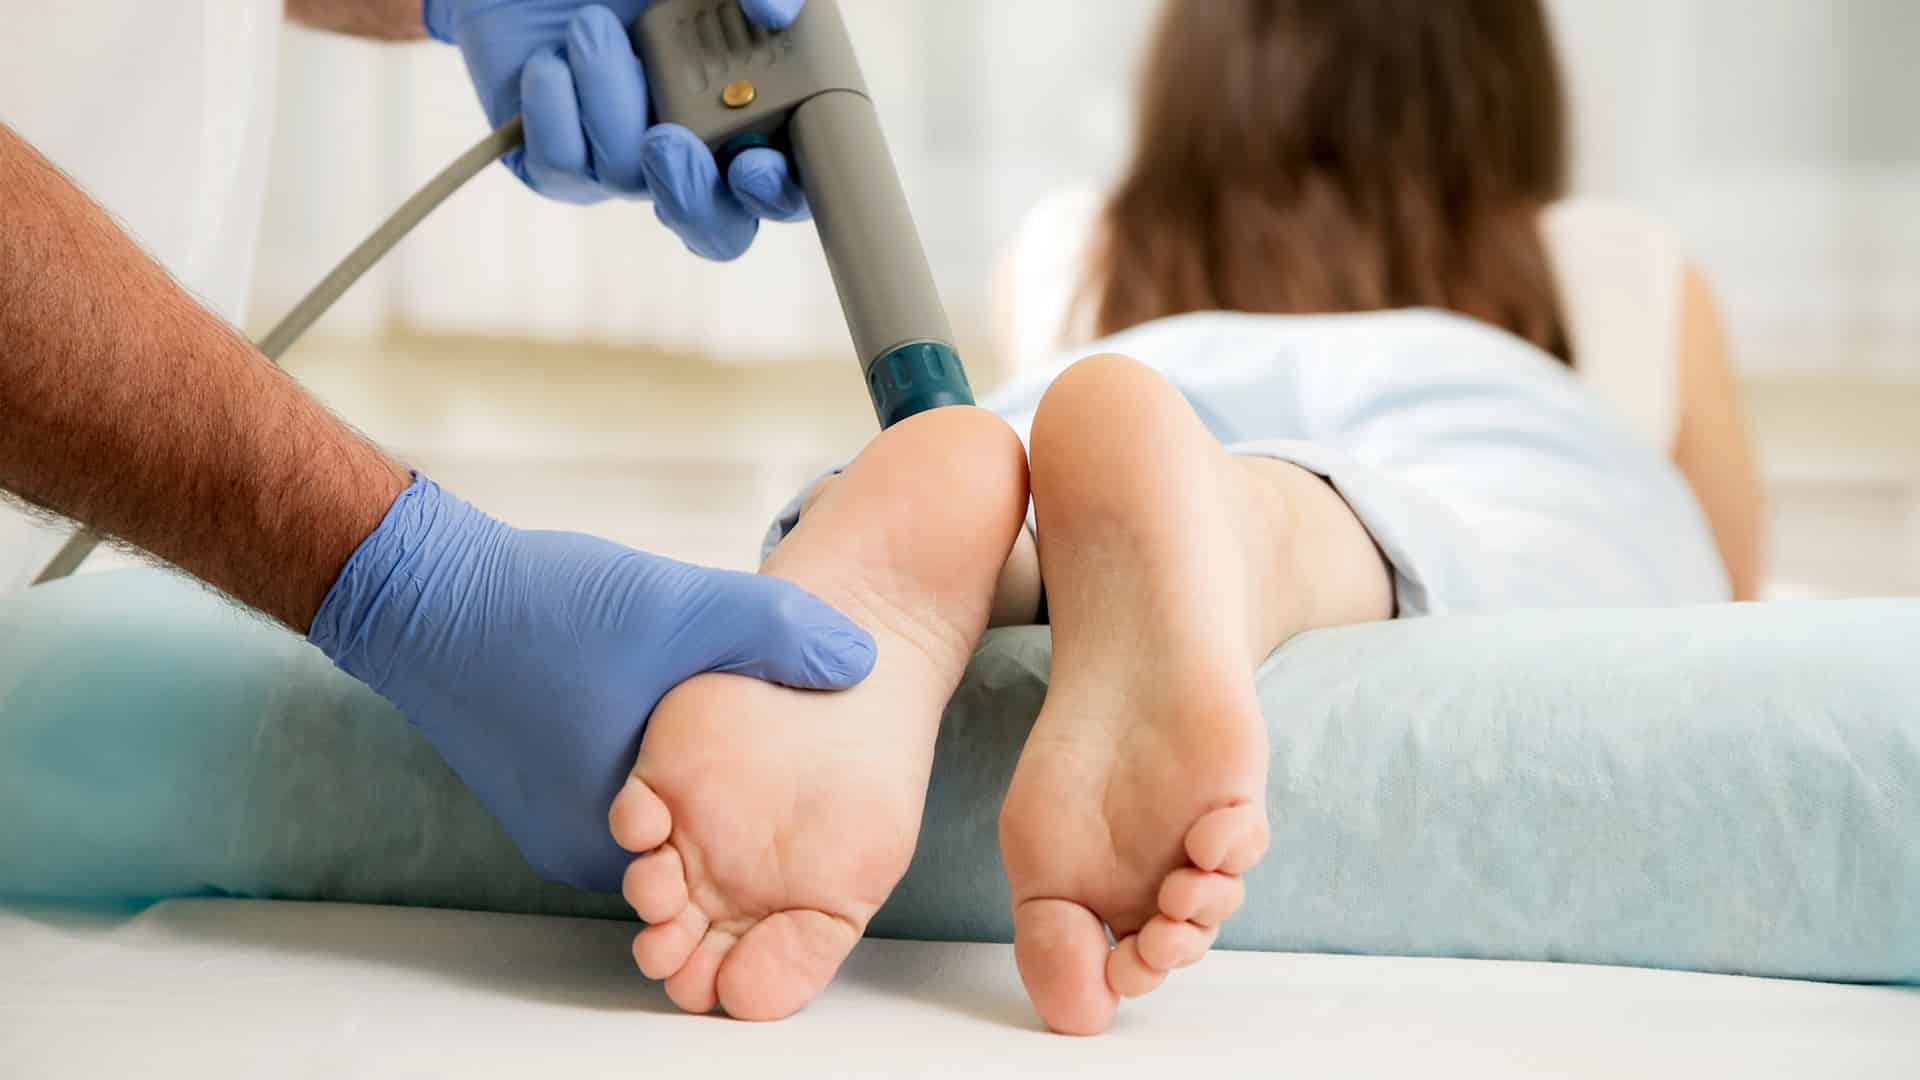 Shockwave therapy podiatry appointment for plantar fasciitis